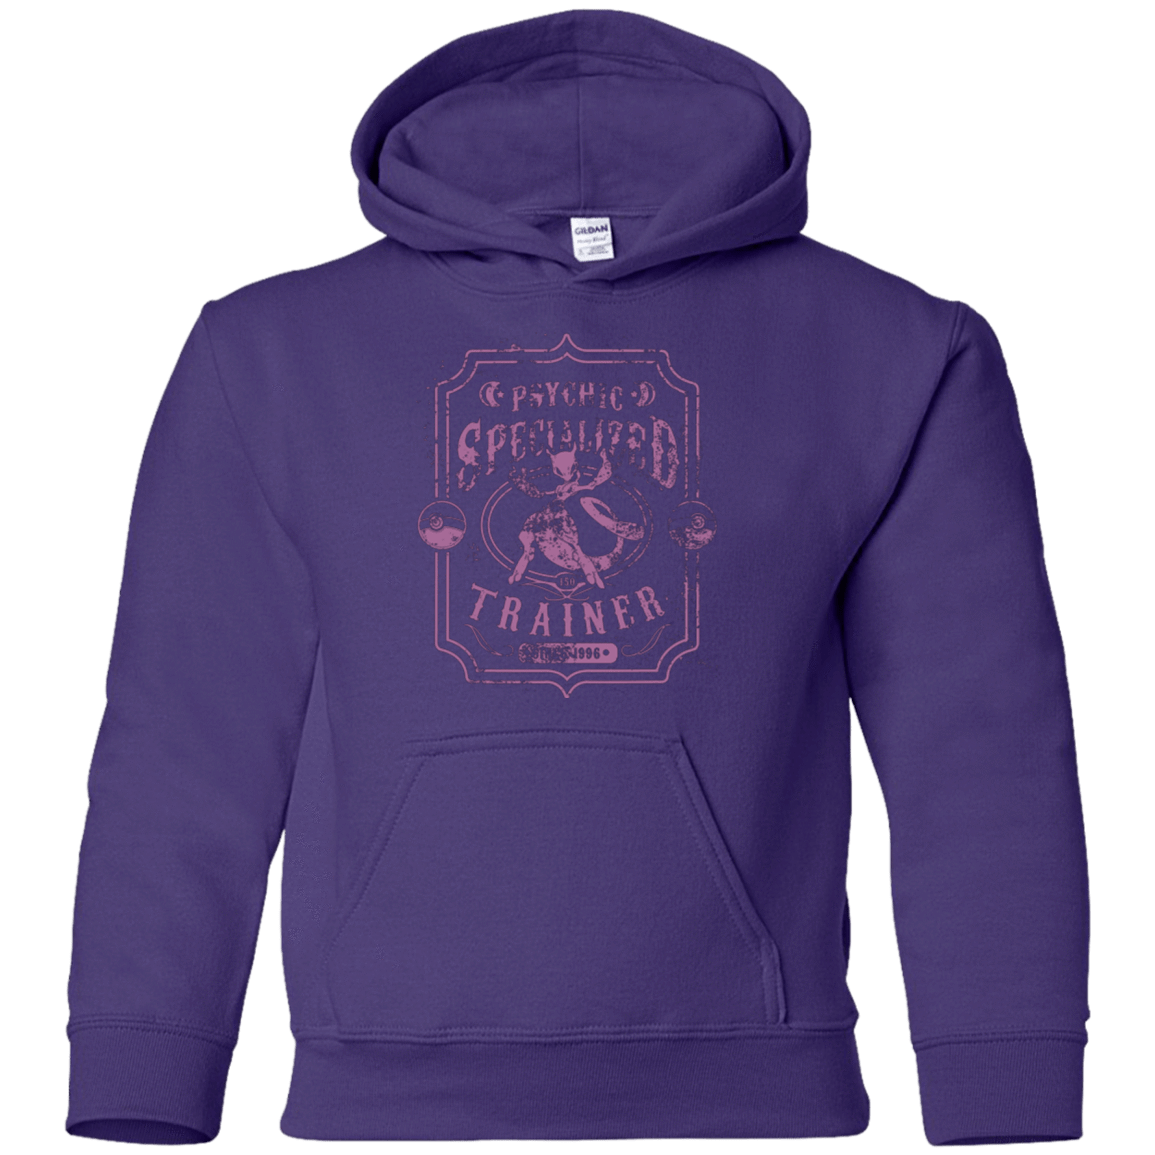 Sweatshirts Purple / YS Psychic Specialized Trainer 2 Youth Hoodie